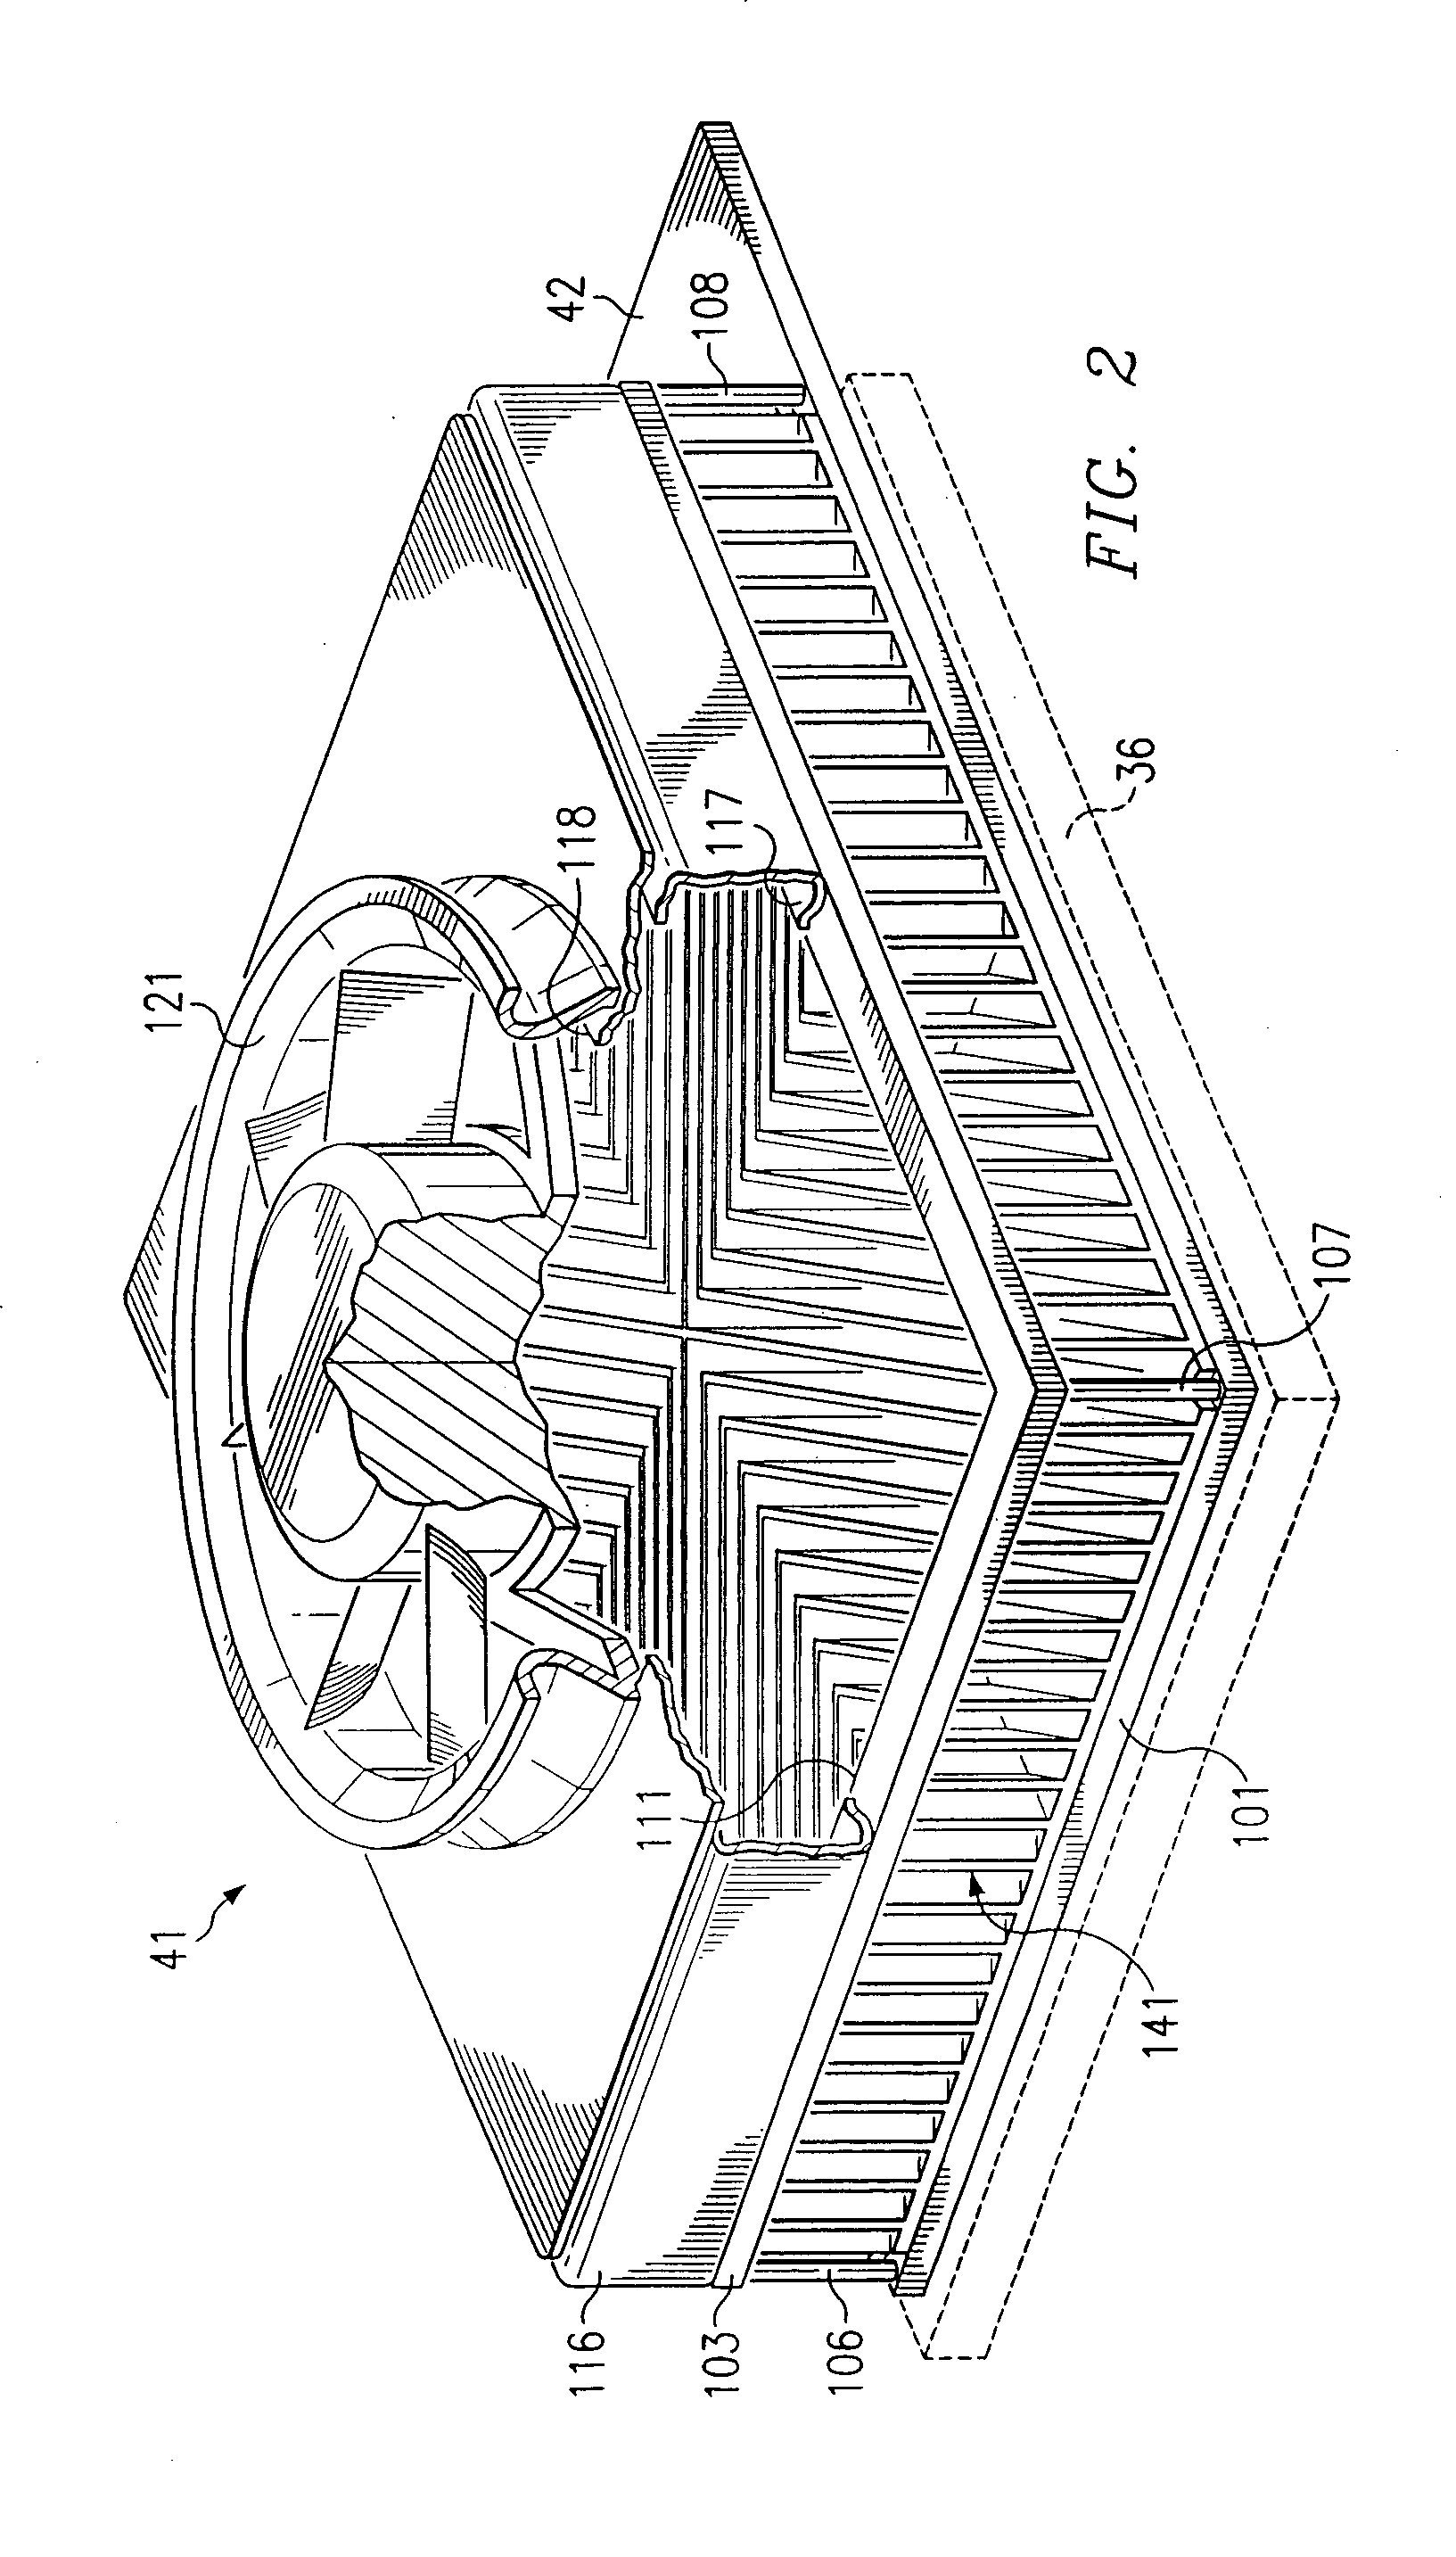 Method and apparatus for cooling a portable computer